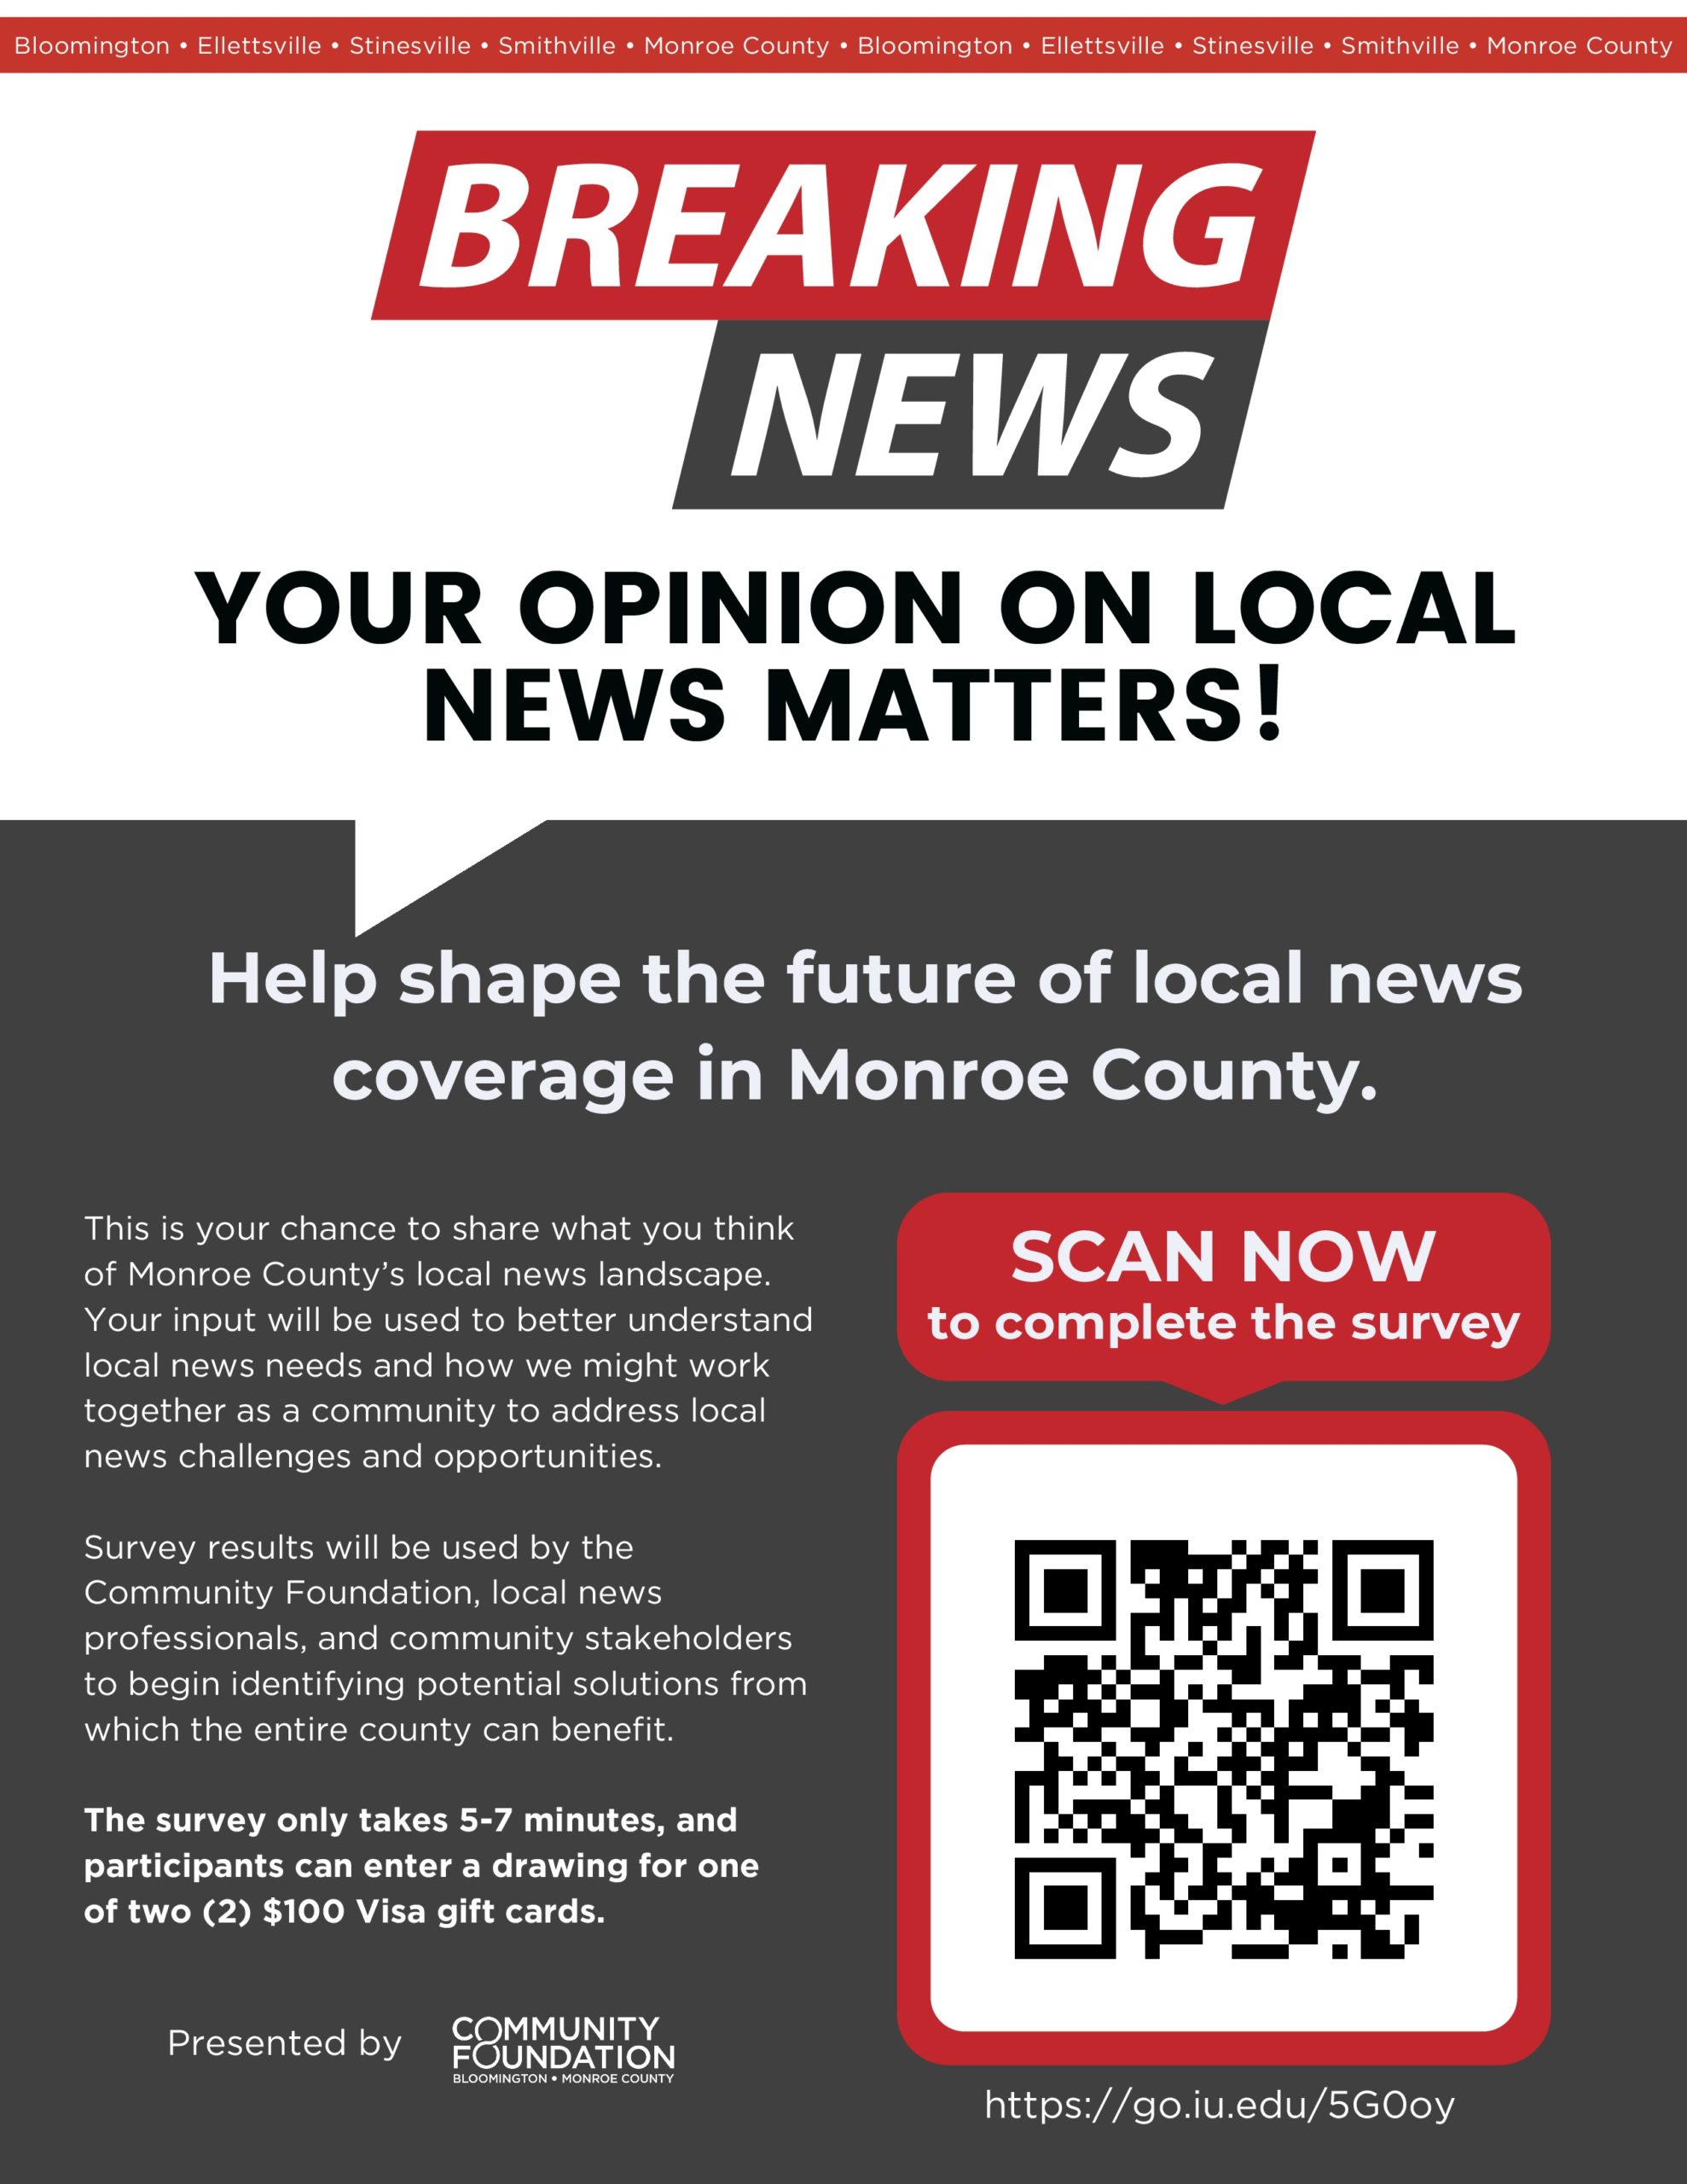 Community Foundation Launches Local News Survey